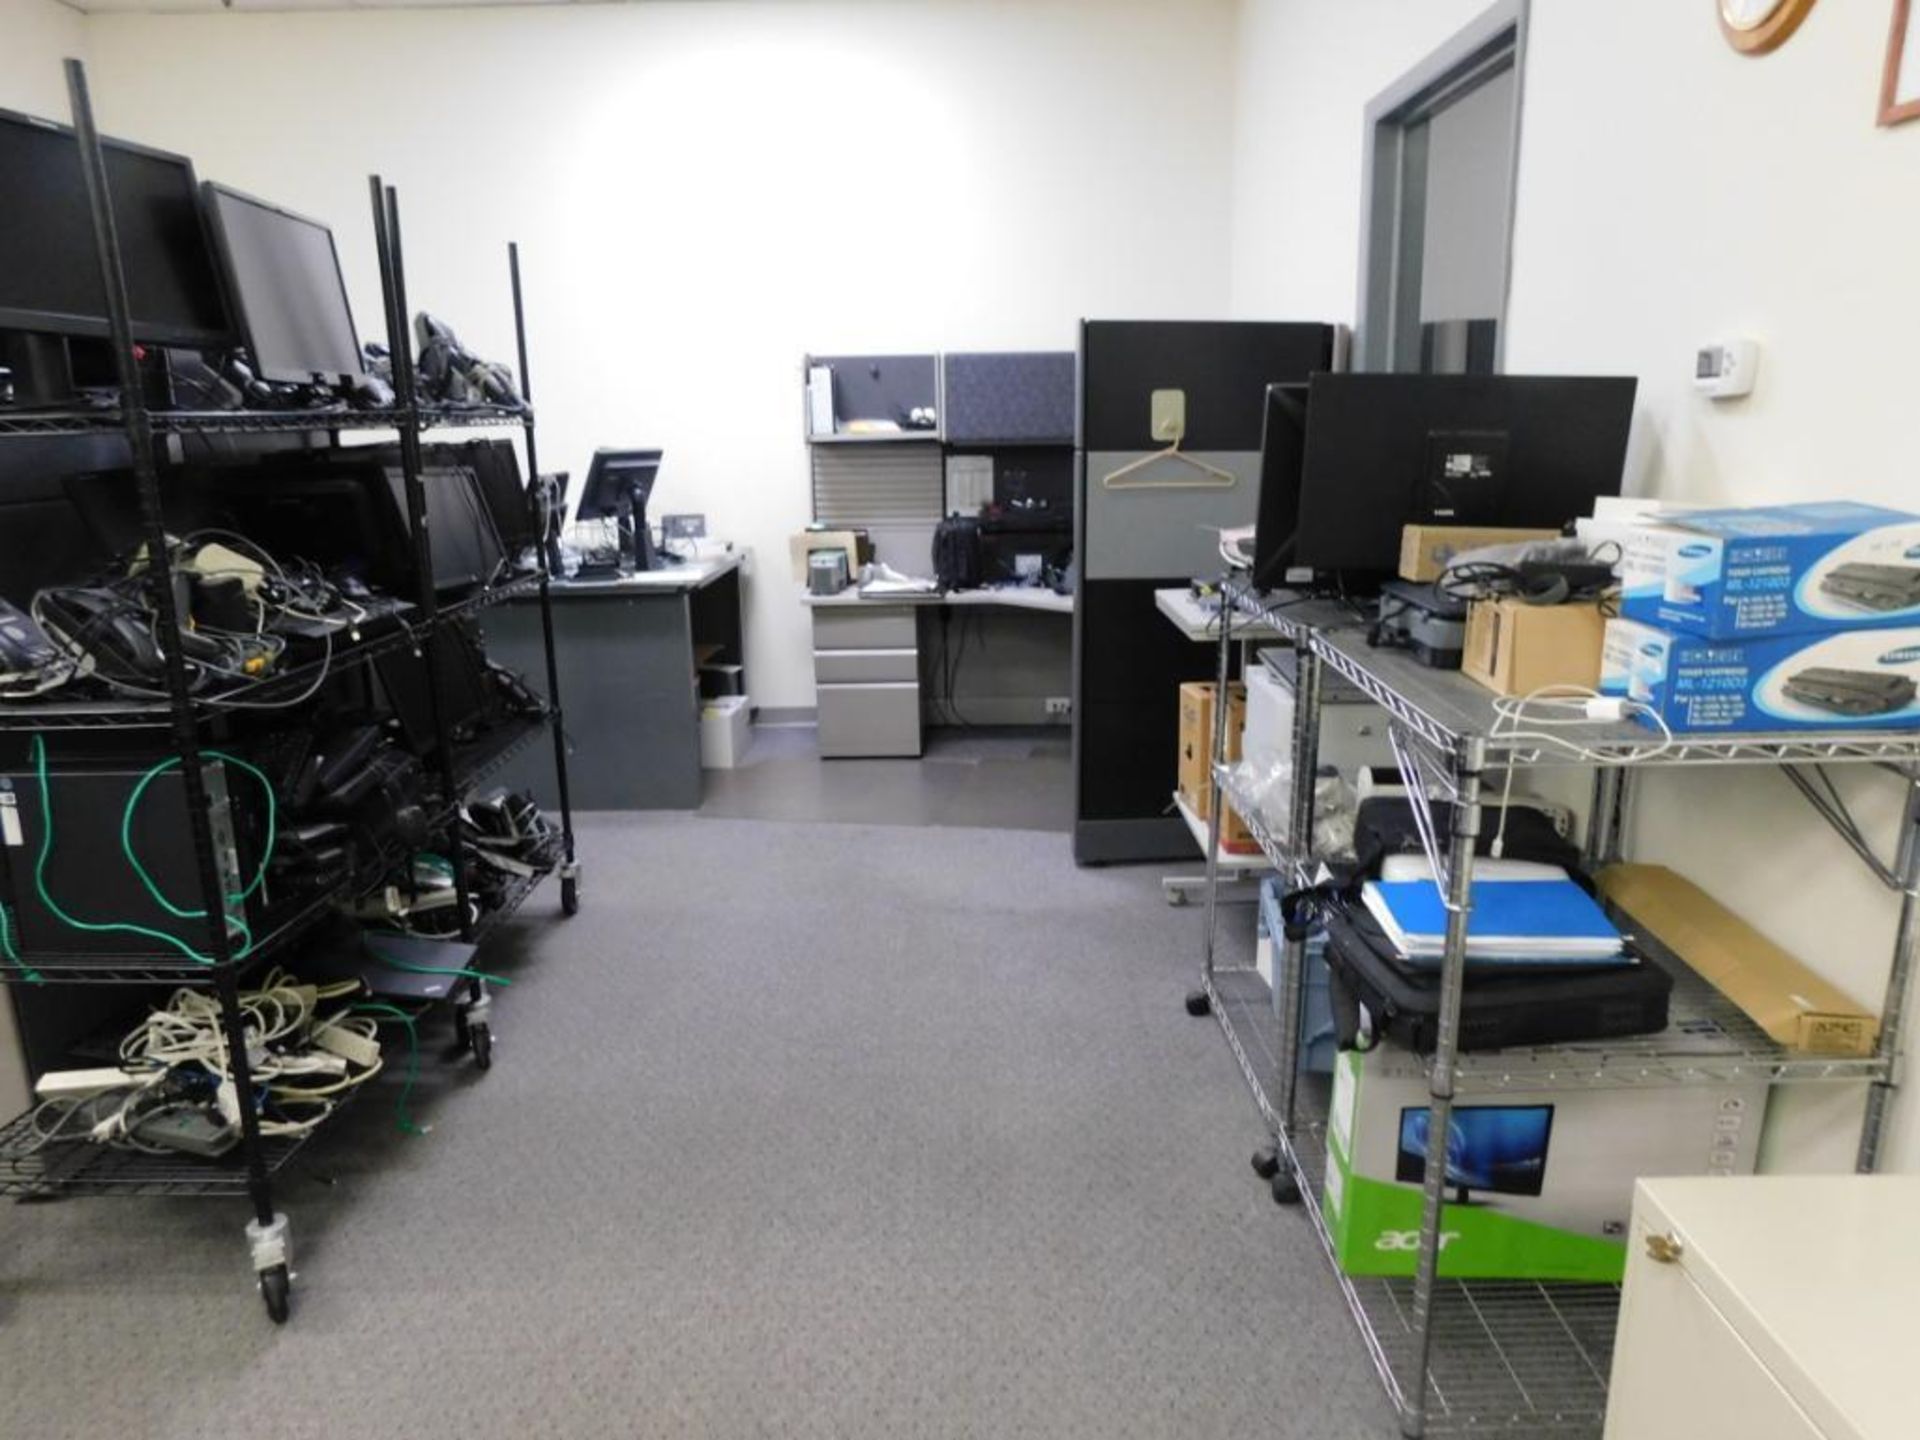 LOT: Contents of Office including (4) Cubicle Work Stations, Light Table, (3) Chairs, (3) Metro Rack - Image 8 of 8